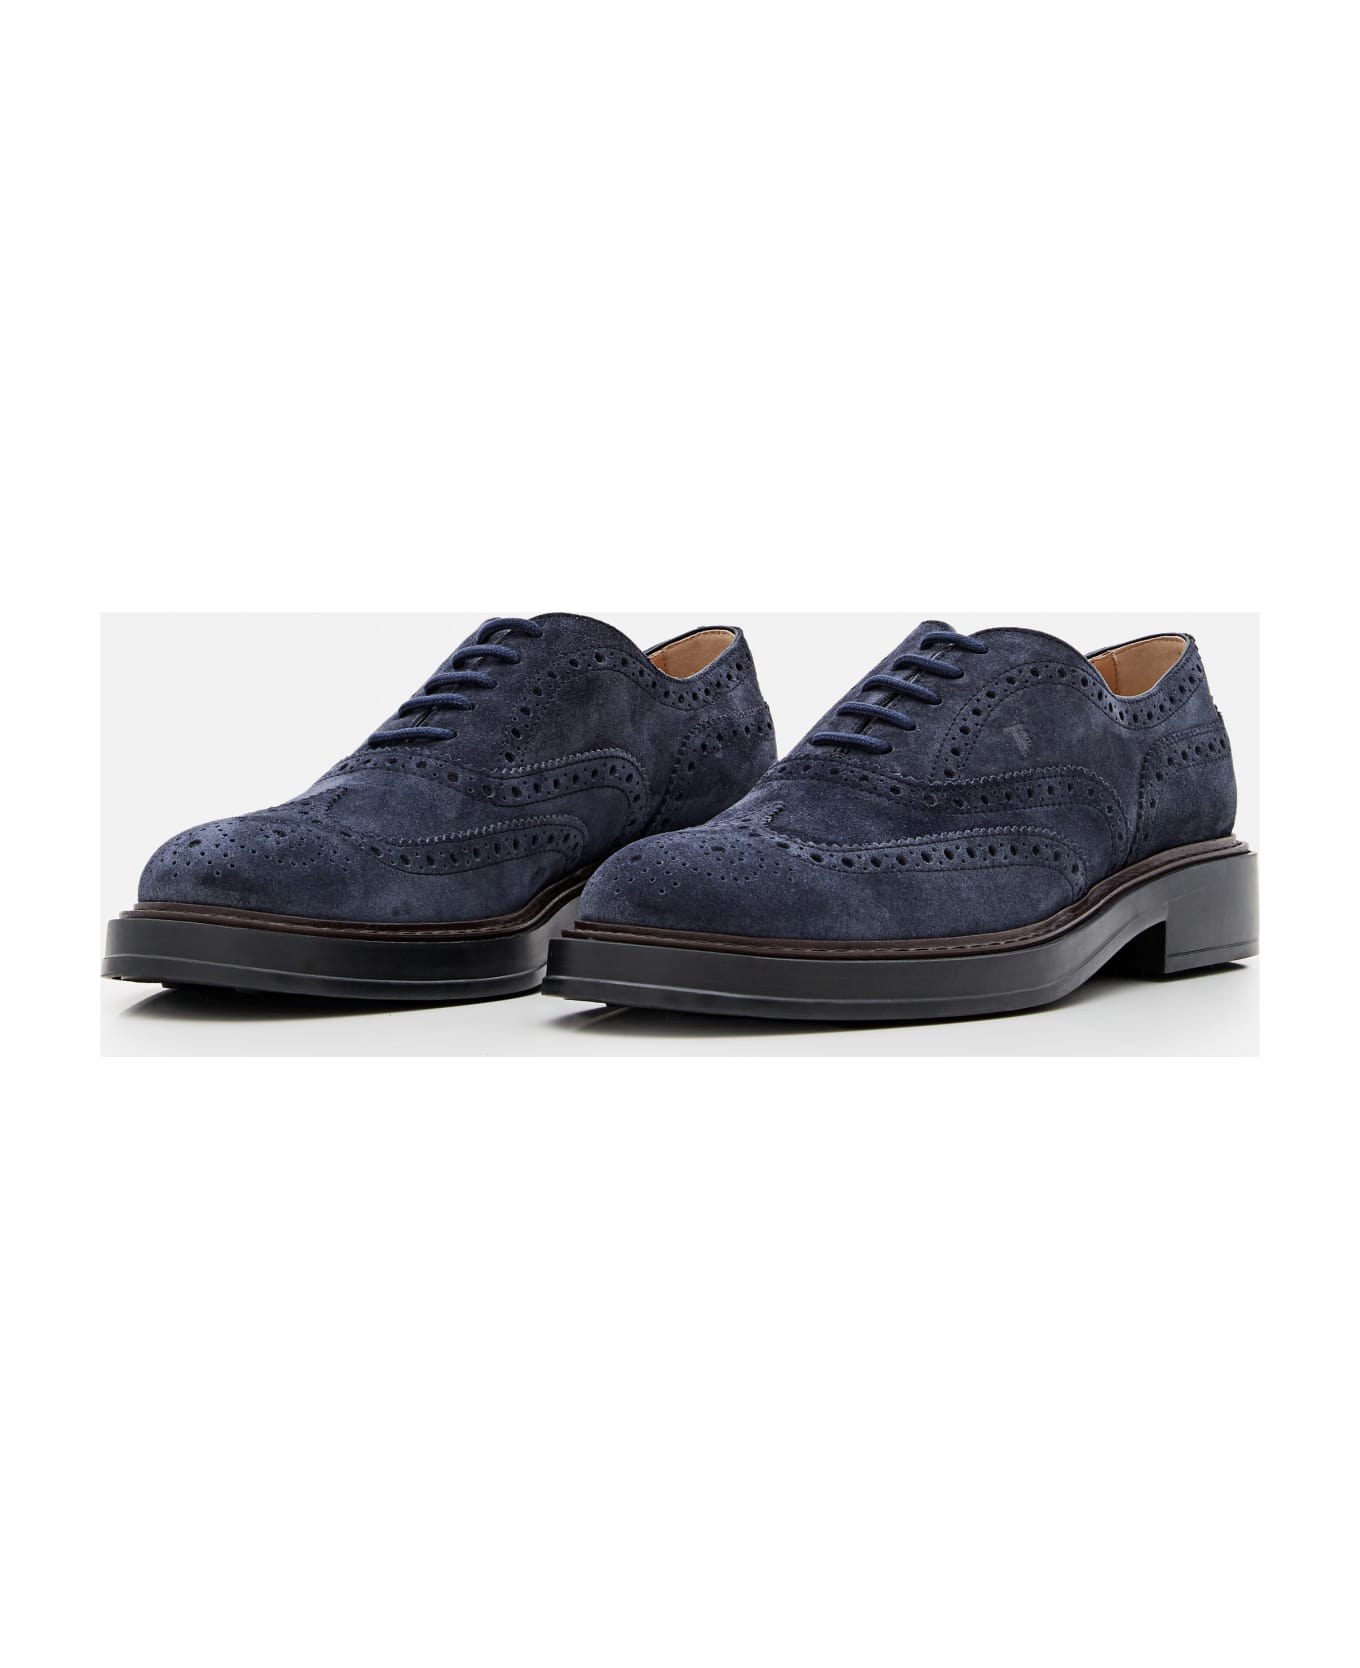 Tod's Francesina Bucature Extralight Derby Shoes - Blue ローファー＆デッキシューズ